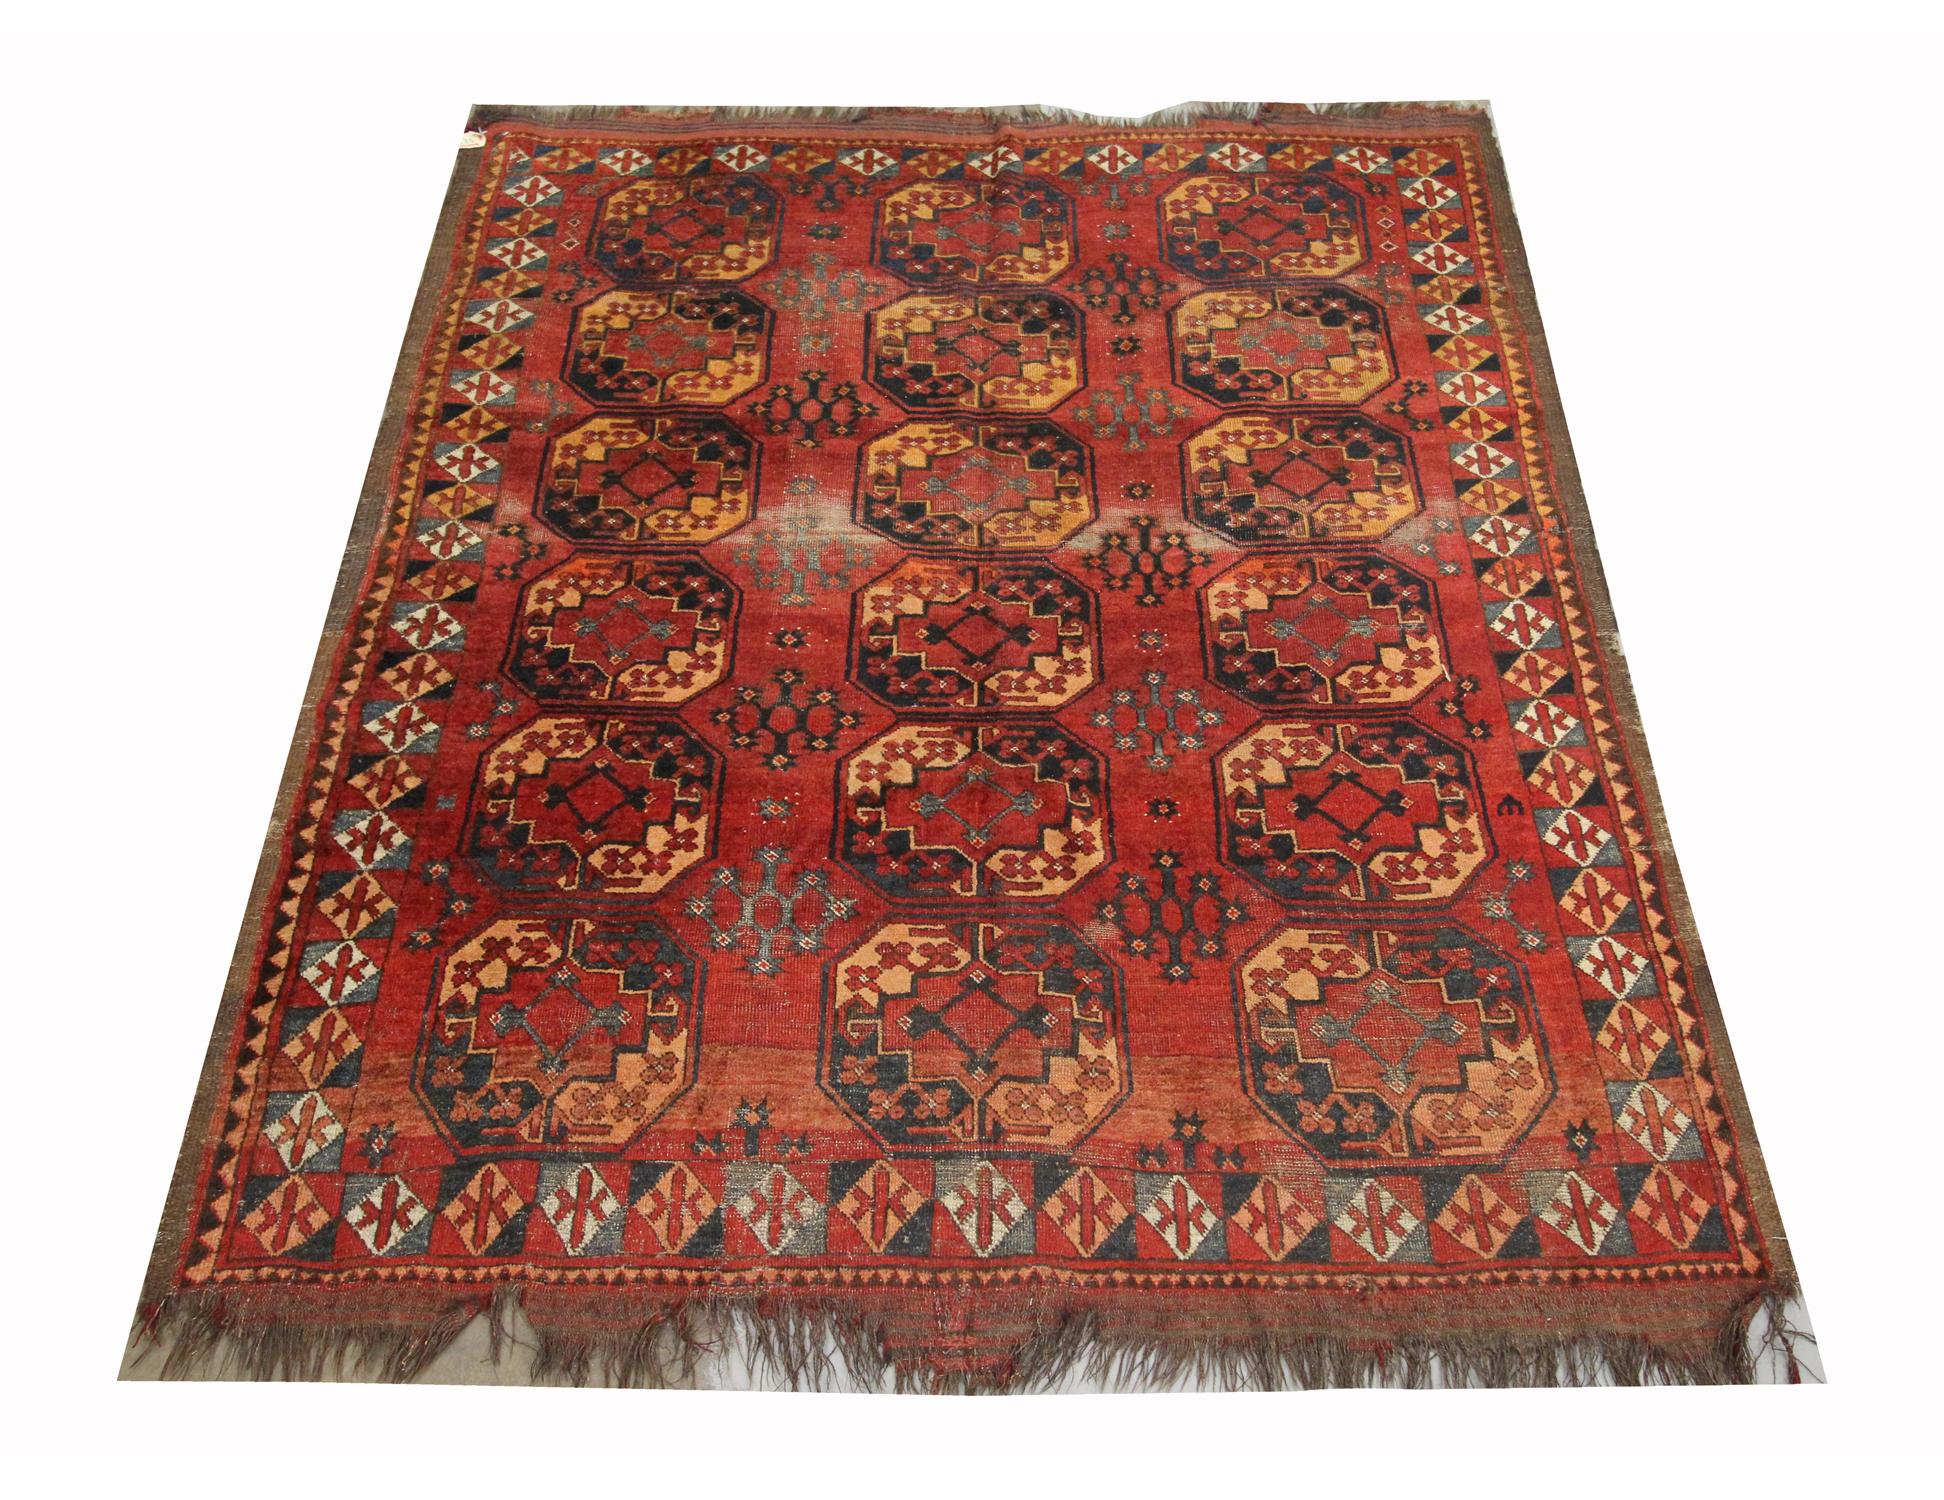 This antique piece is a Turkmen Ersari rug woven by hand in the 1880s. The central design features a rust background with a repeating traditional Turkmen medallion pattern that has been woven in accents of orange and grey/black. The intricate